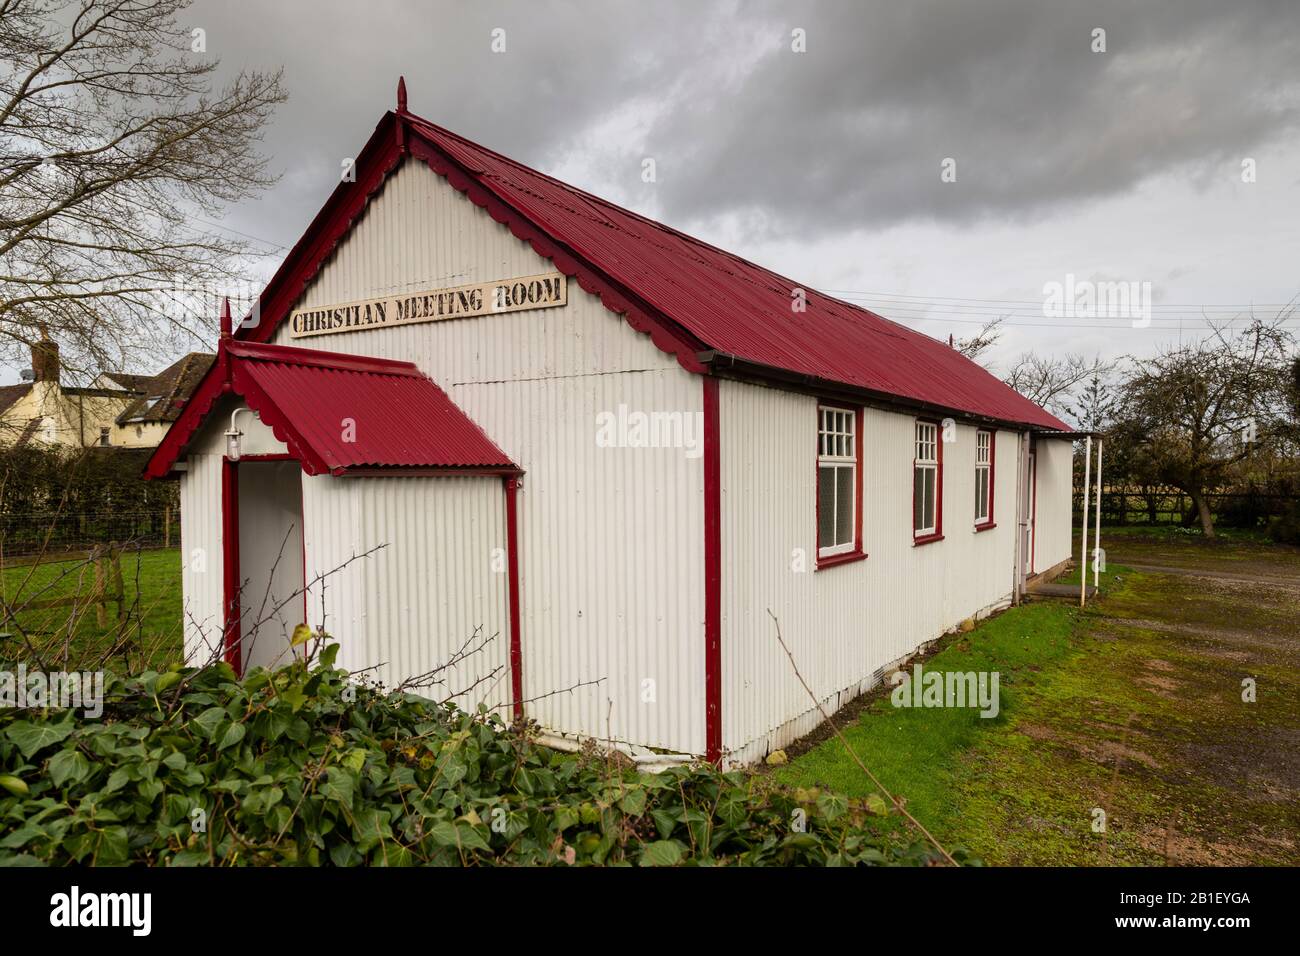 Prefabricated tin church 'Christian Meeting House' at Defford, Worcestershire, UK Stock Photo